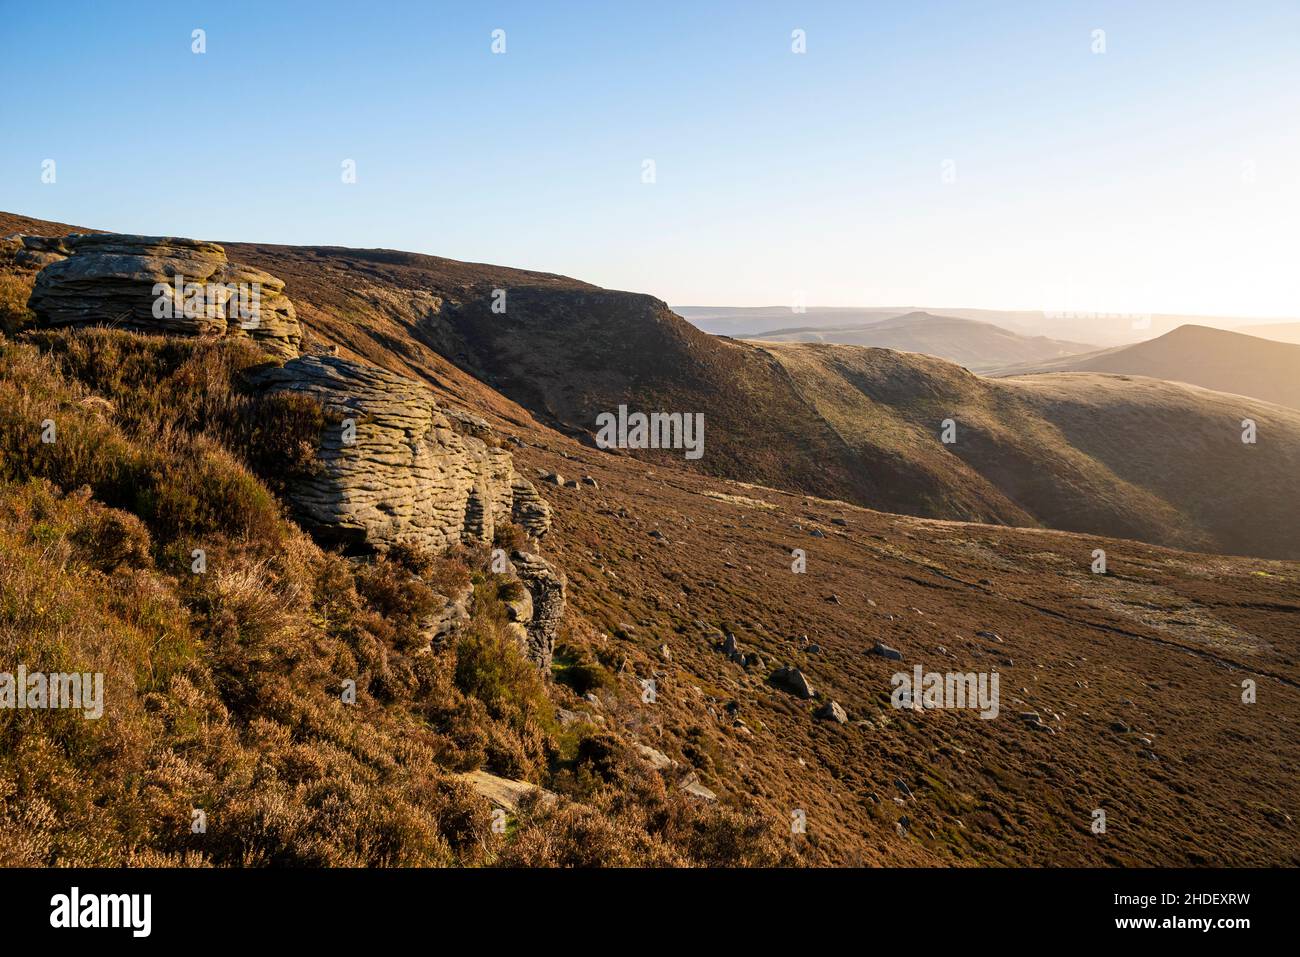 View from Ringing Roger on the edge of Kinder Scout, Edale, Derbyshire in the Peak District. Stock Photo